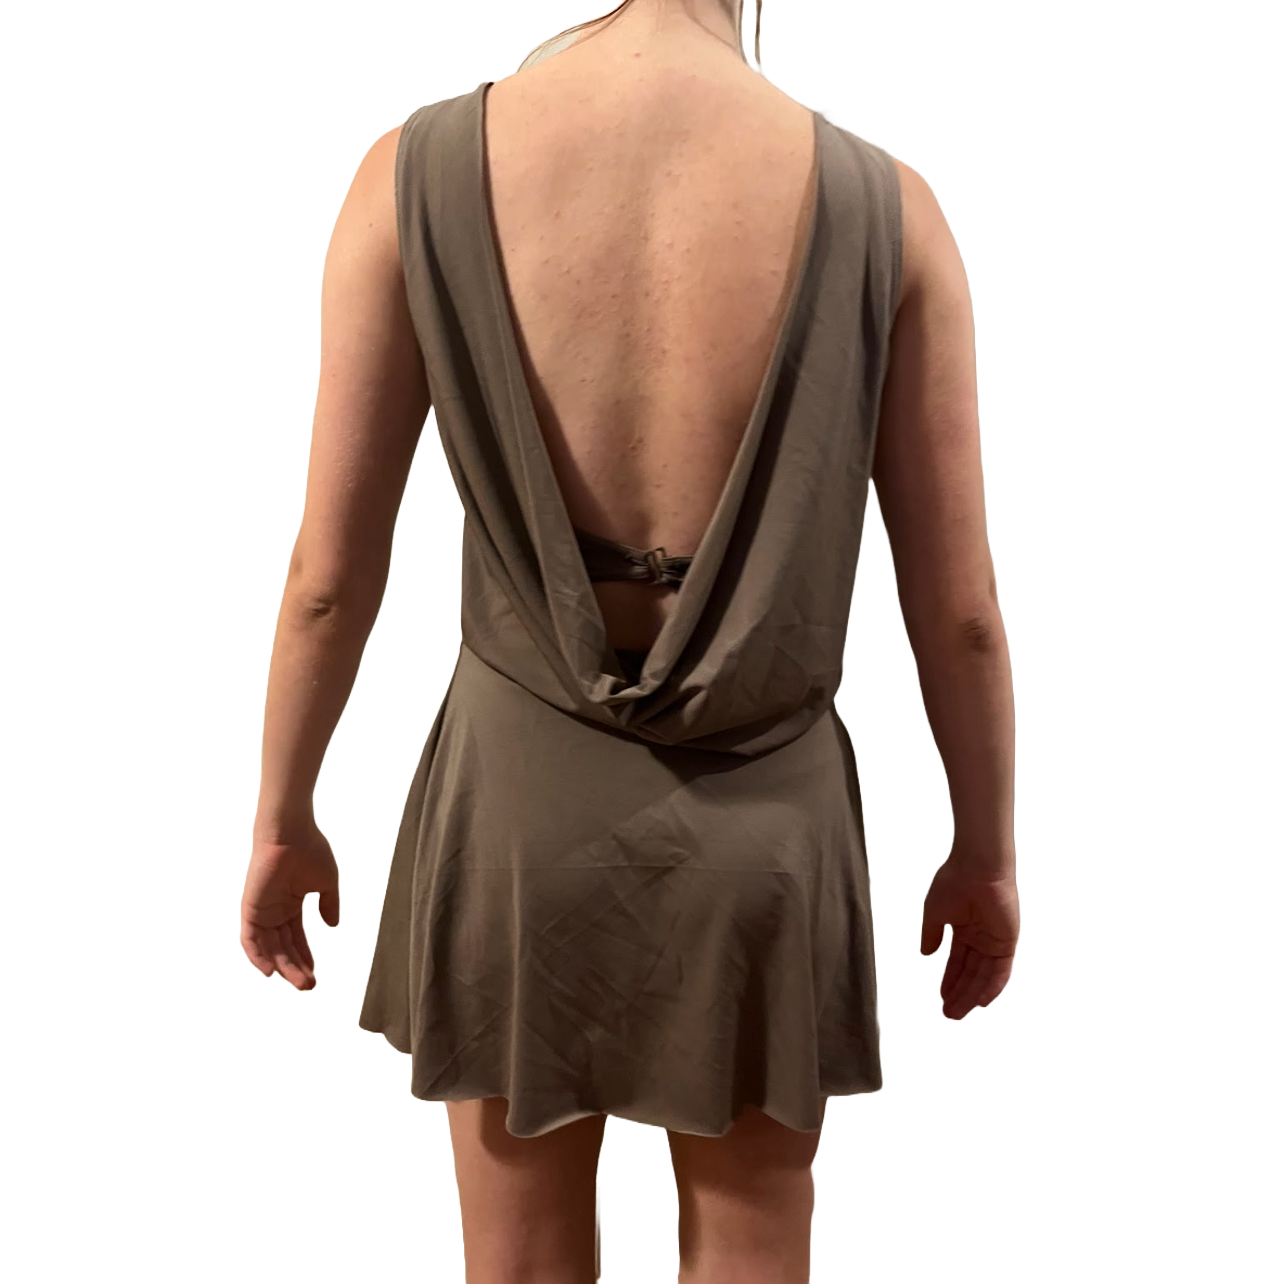 Taupe bodysuit with open back and skirt